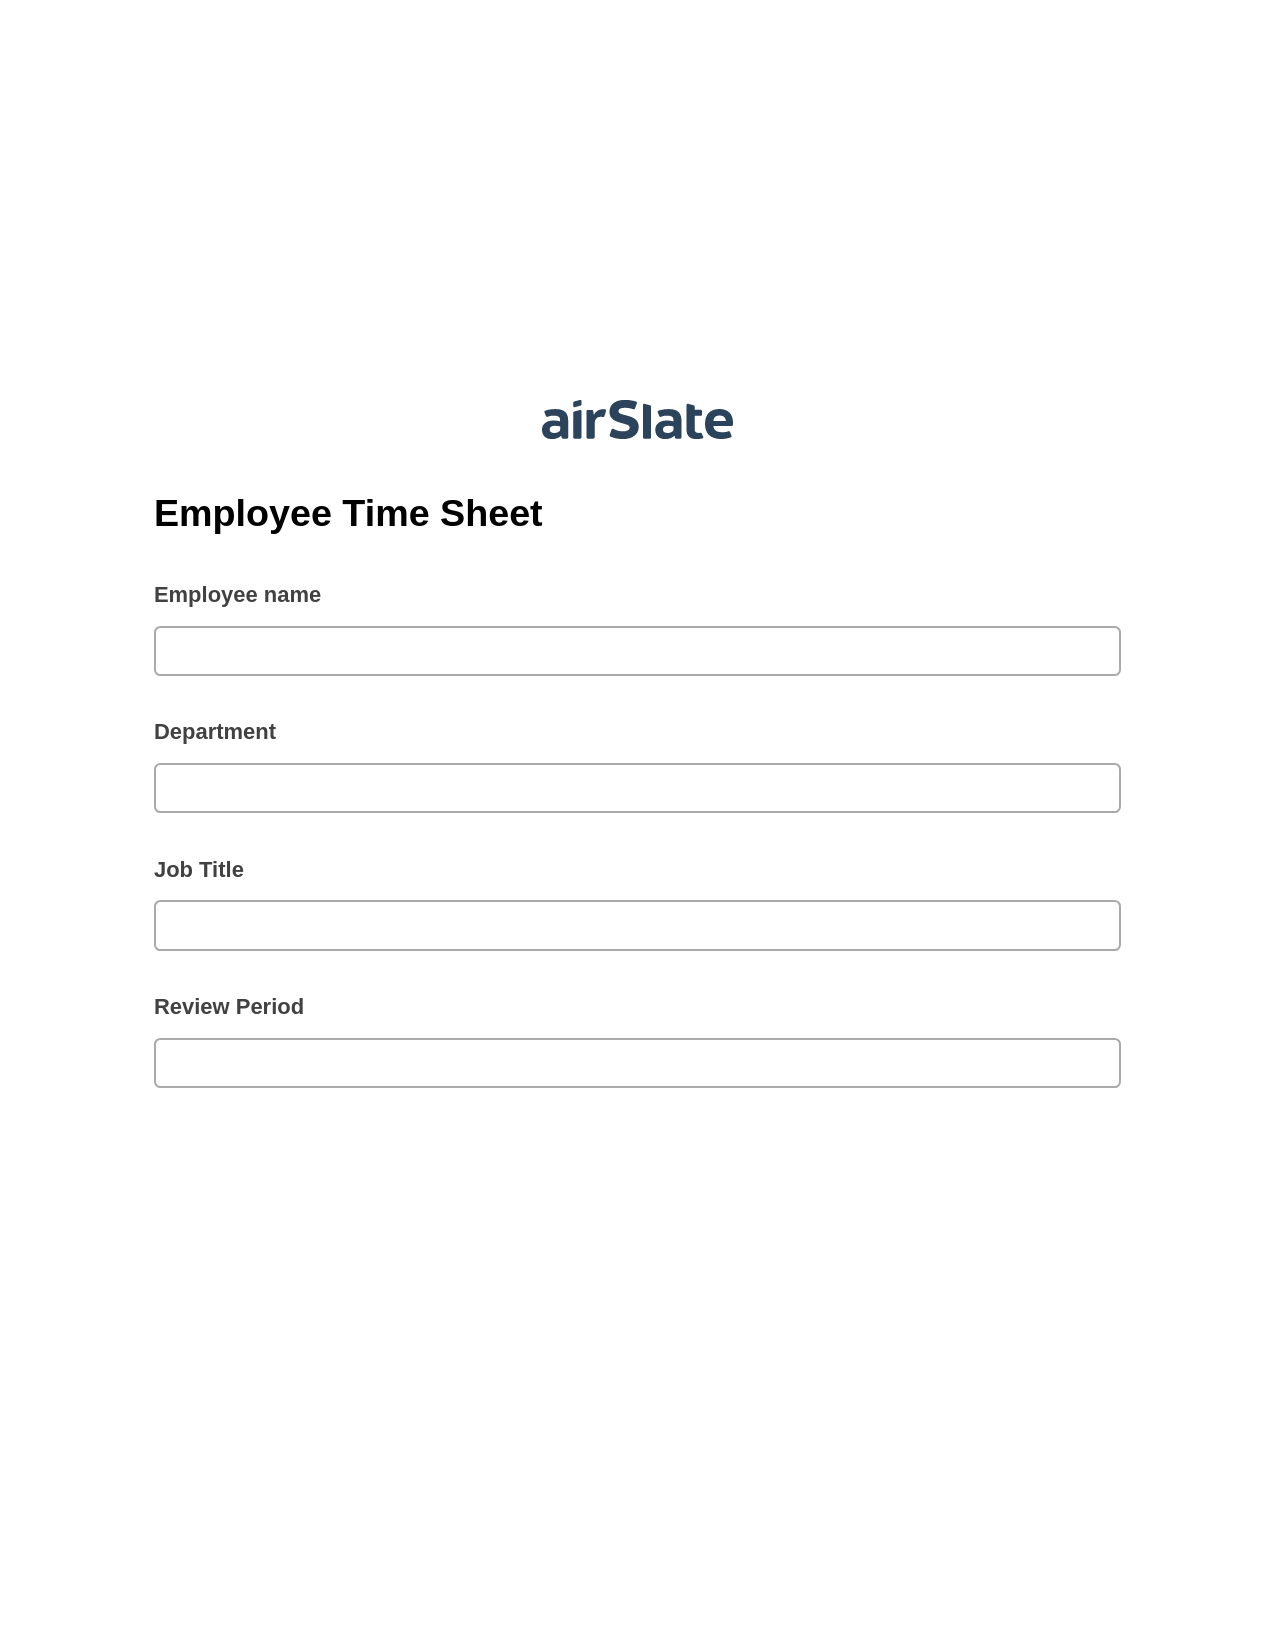 Employee Time Sheet Pre-fill Dropdowns from Airtable, Update Audit Trail Bot, Archive to Dropbox Bot